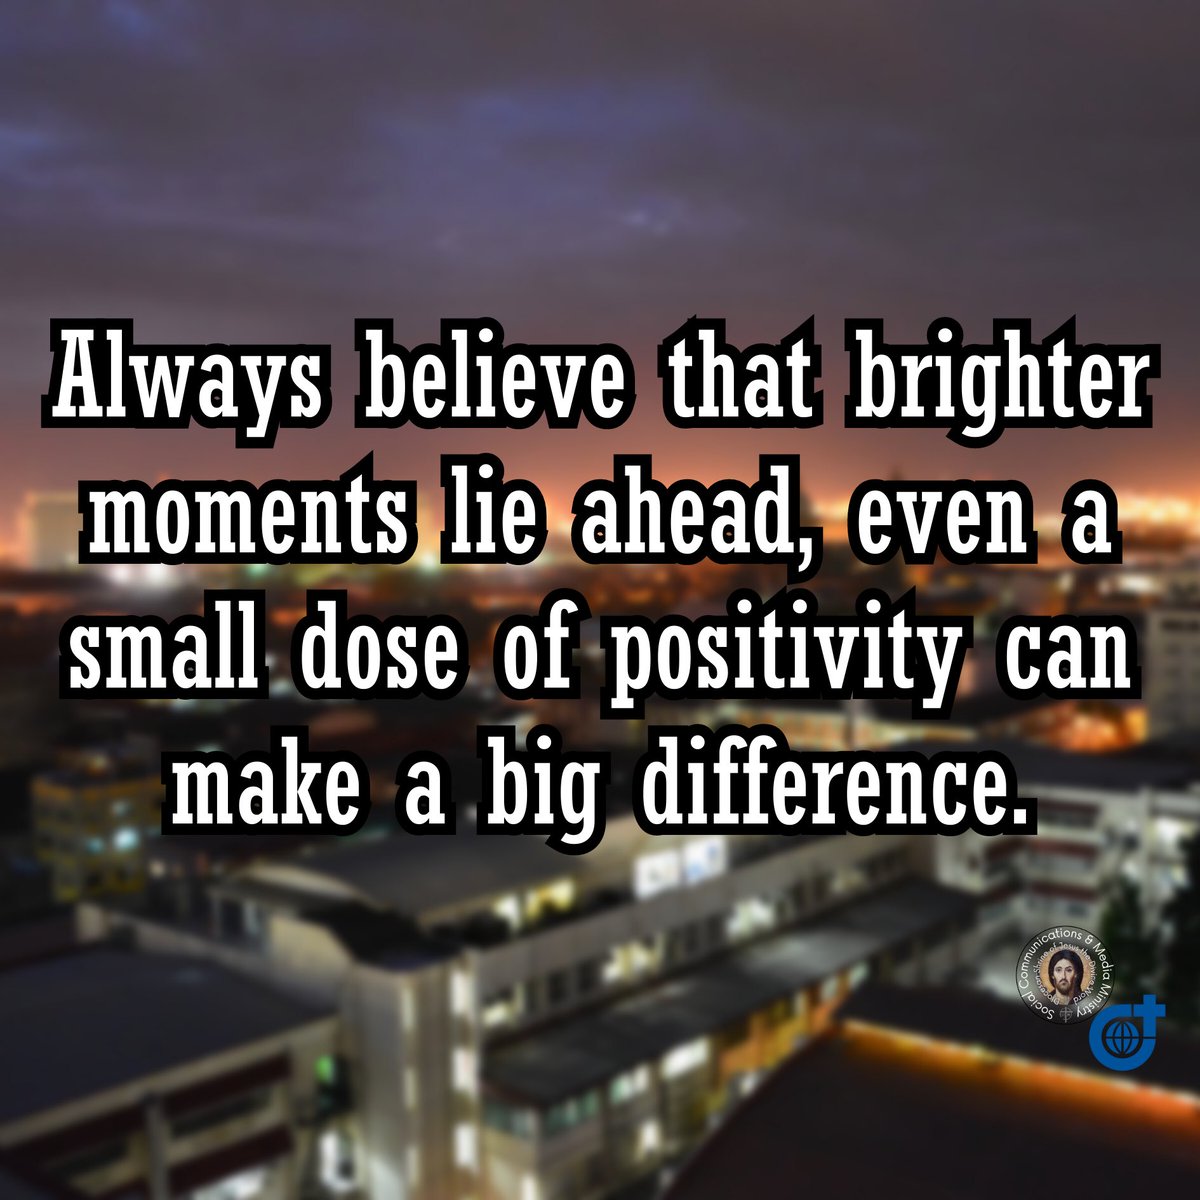 …even a small dose of positivity can make a big difference.

#SmallStepsBigDifference
#PositiveThoughts #HopeForBetter #OptimisticOutlook #BrighterDaysAhead

***

#SVD #DSJDW #DivineWord
#WitnessToTheWord #SVDmission 
#SVDmisyonero #commitedToHISmission
#ThinkMission #ThinkSVD